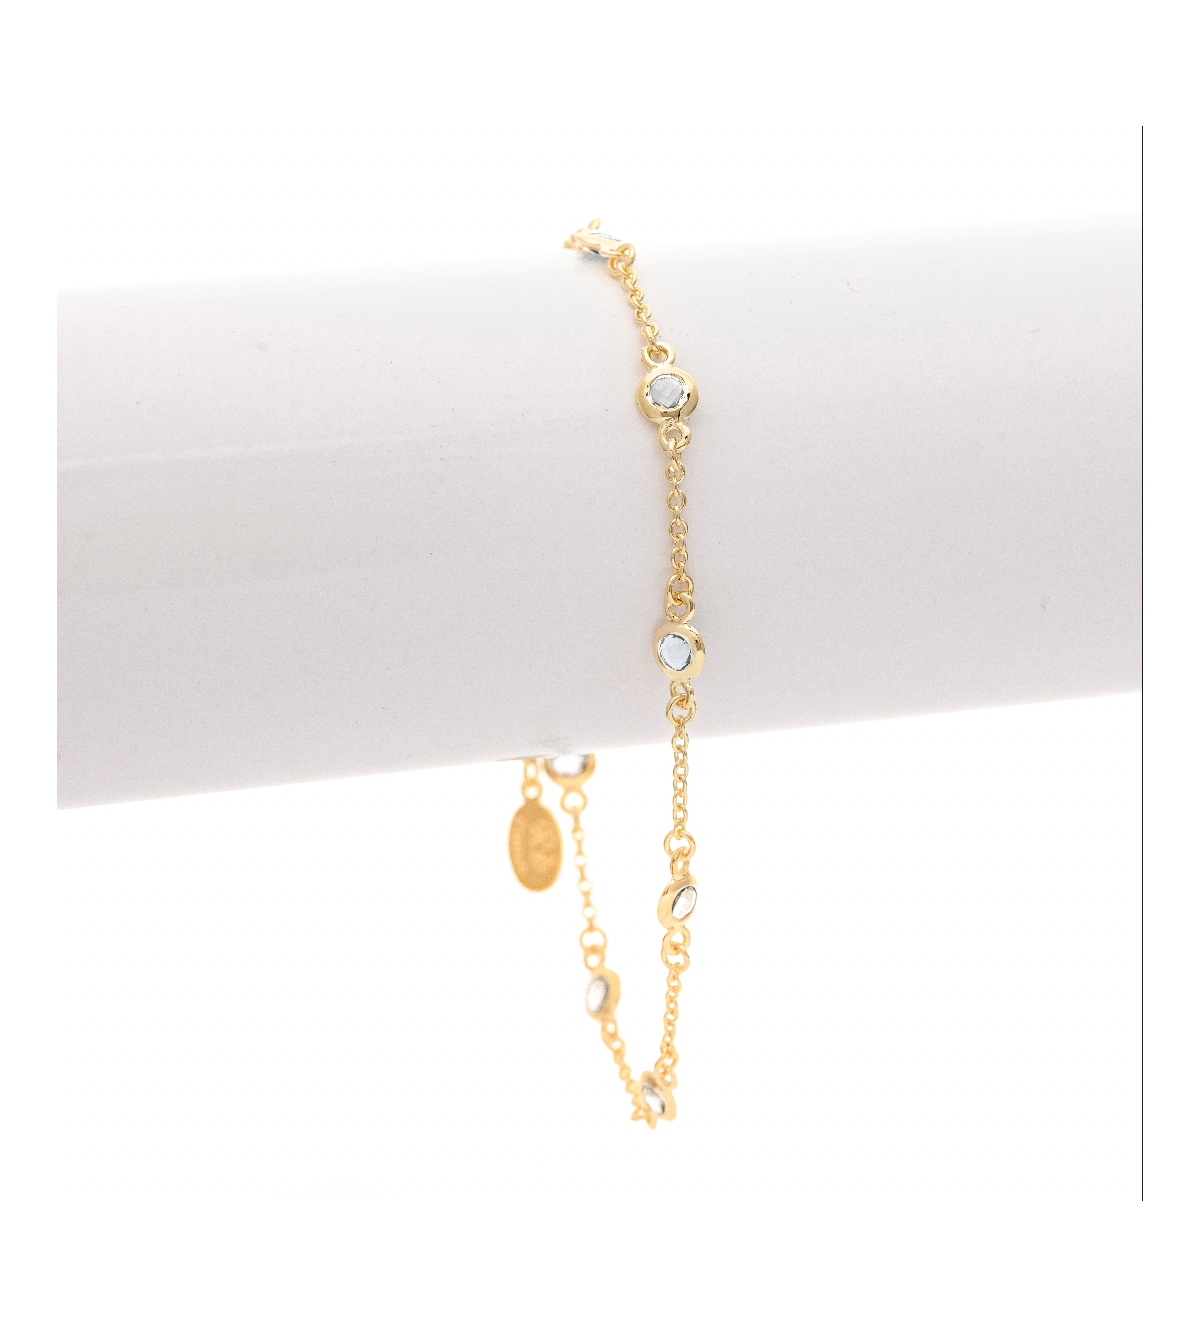 Crystal Bezel Station Bracelet - Gold with clear cubic zirconia